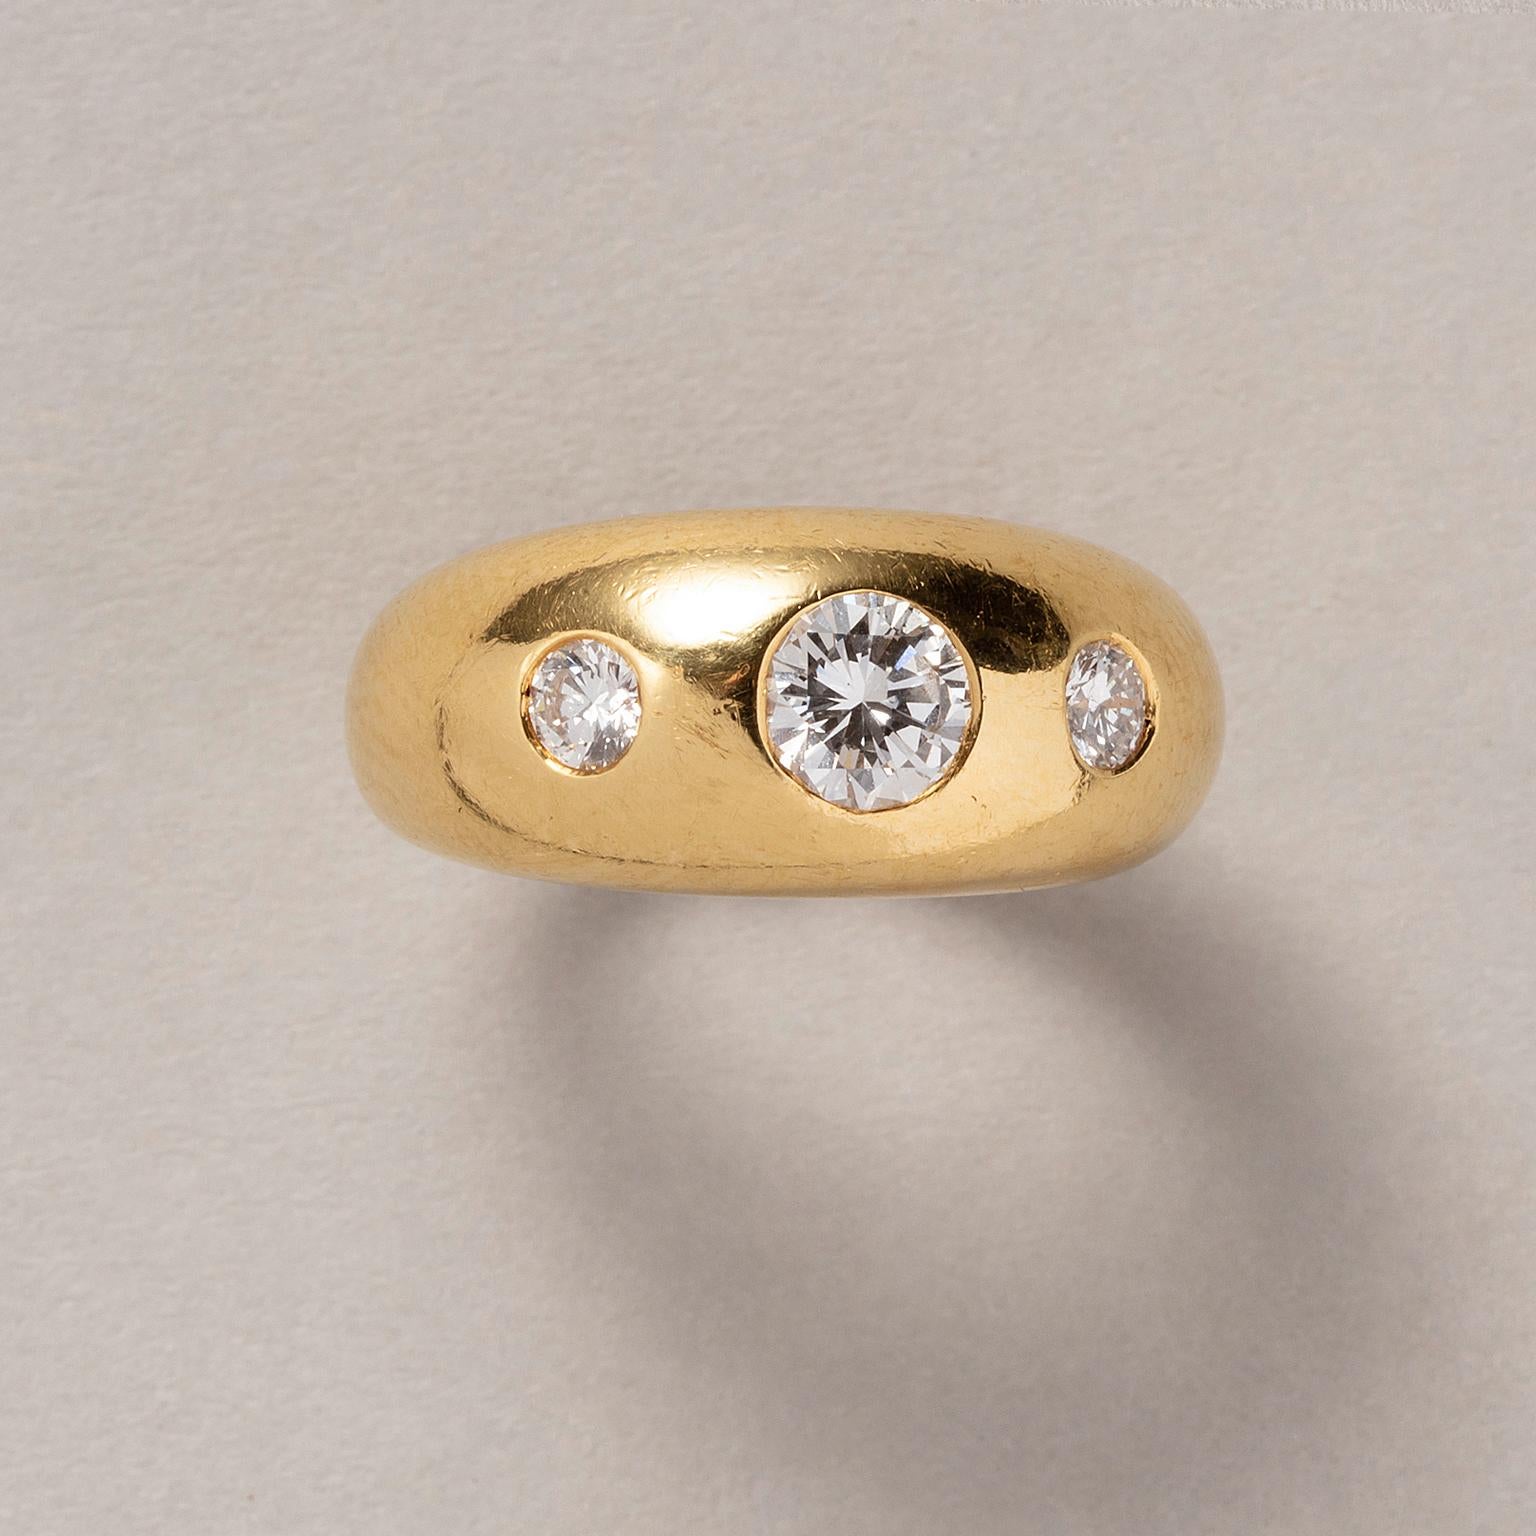 An 18 carat yellow gold dome ring set with 3 brilliant cut diamonds (circa 1.05 carat in total). Signed and numbered: Cartier, 84 BX 060.

weight: 8.38 grams
ring size: 16.5 mm / 6 US
width: 10 mm